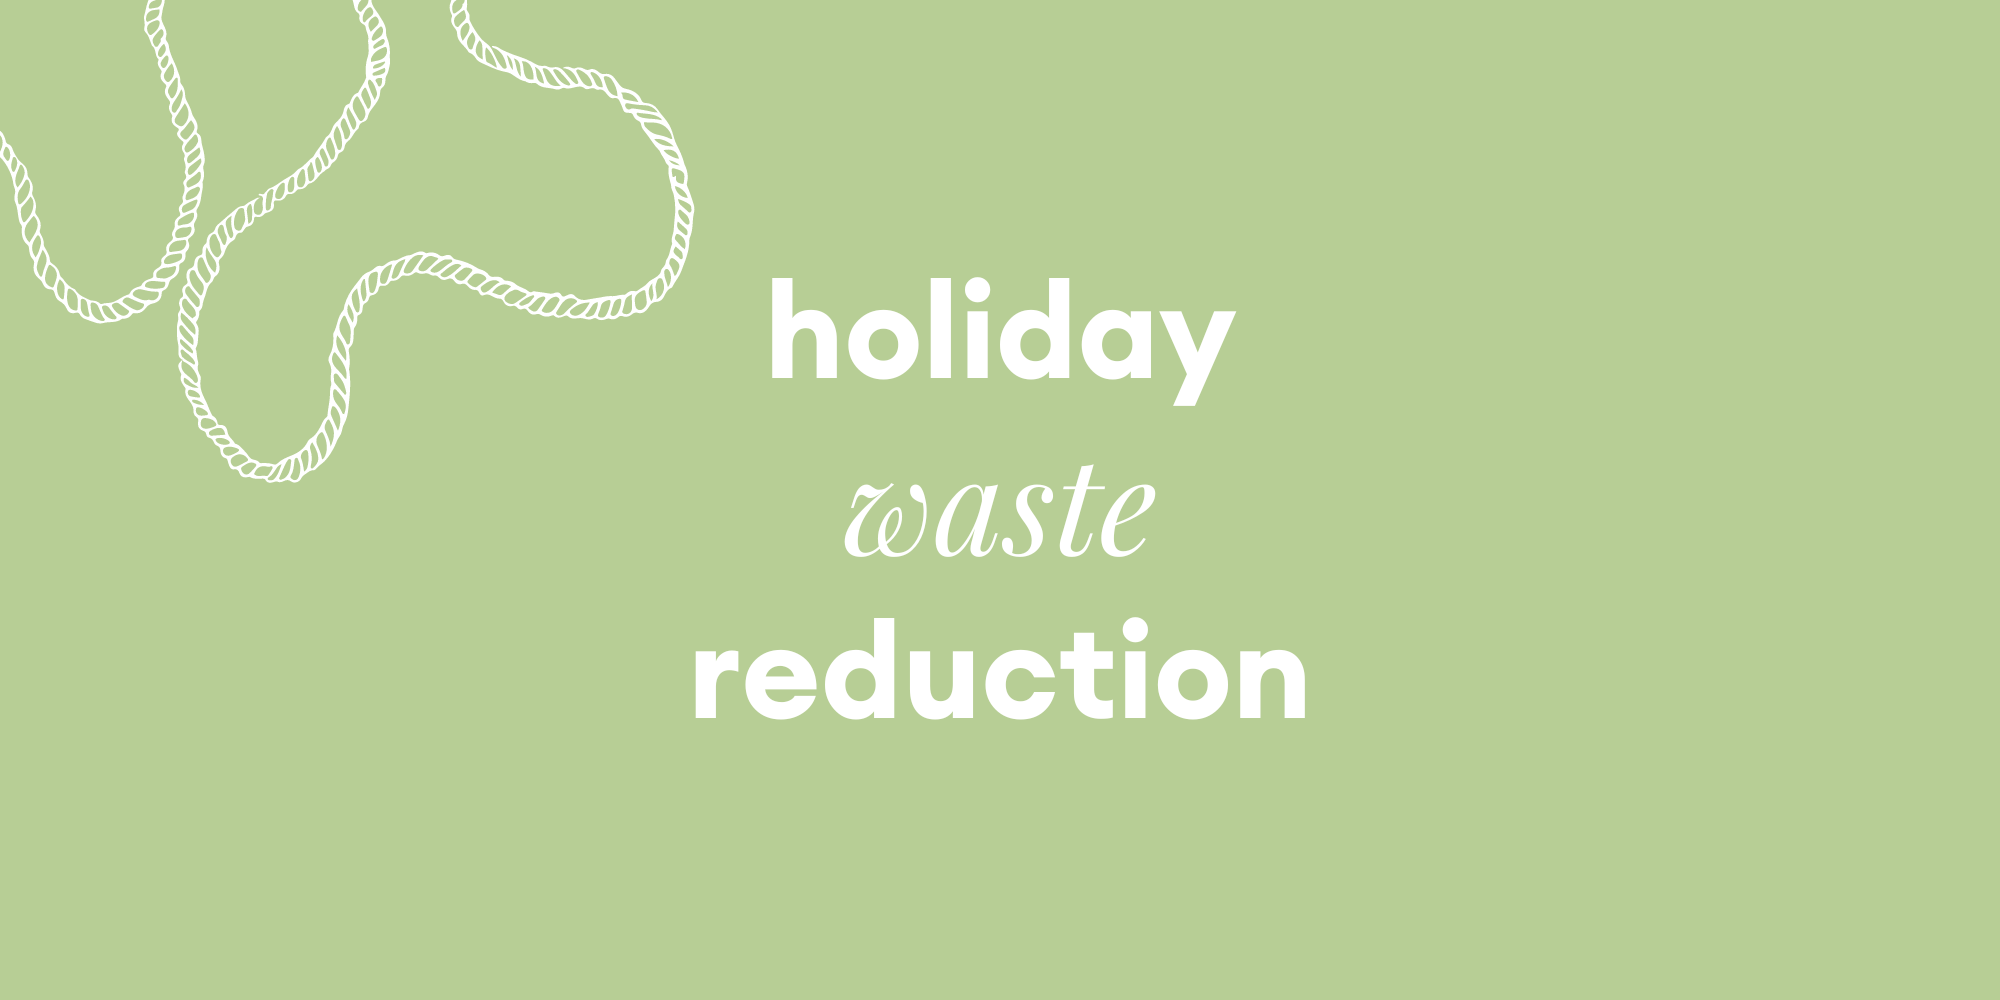 How to have a sustainable holiday season.